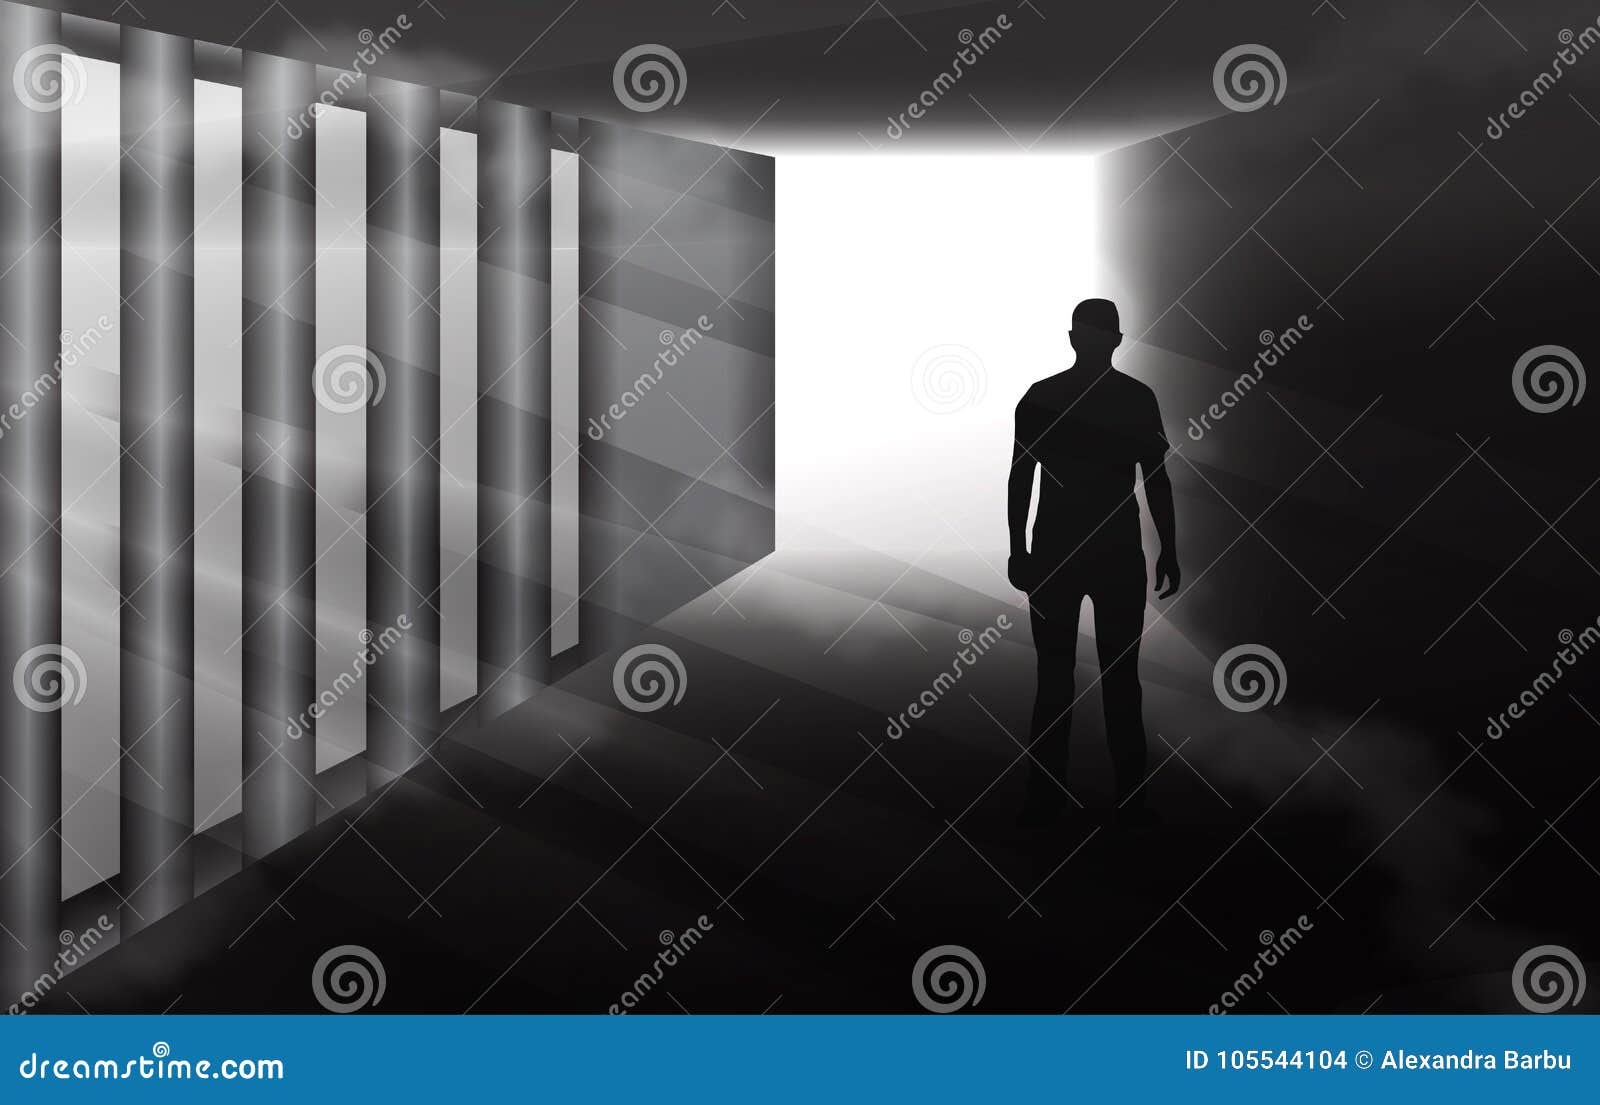 Mysterious Man Silhouette In Misty Tunnel Stock Vector - Illustration ... Silhouette Man Walking Tunnel